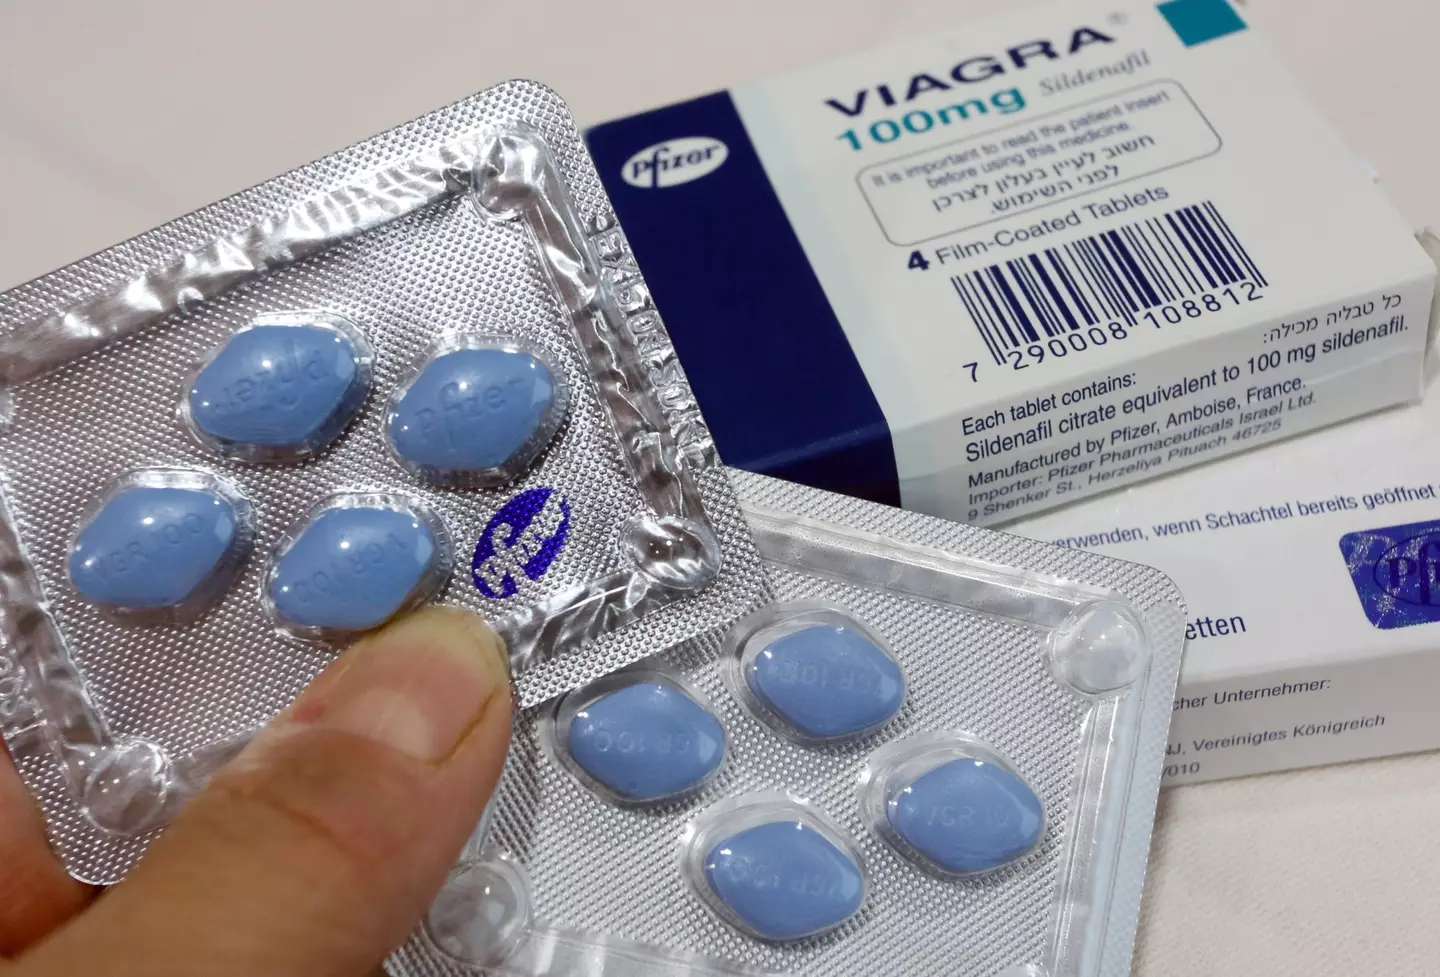 The US military spent $41.6 million on Viagra in one single year, apparently.